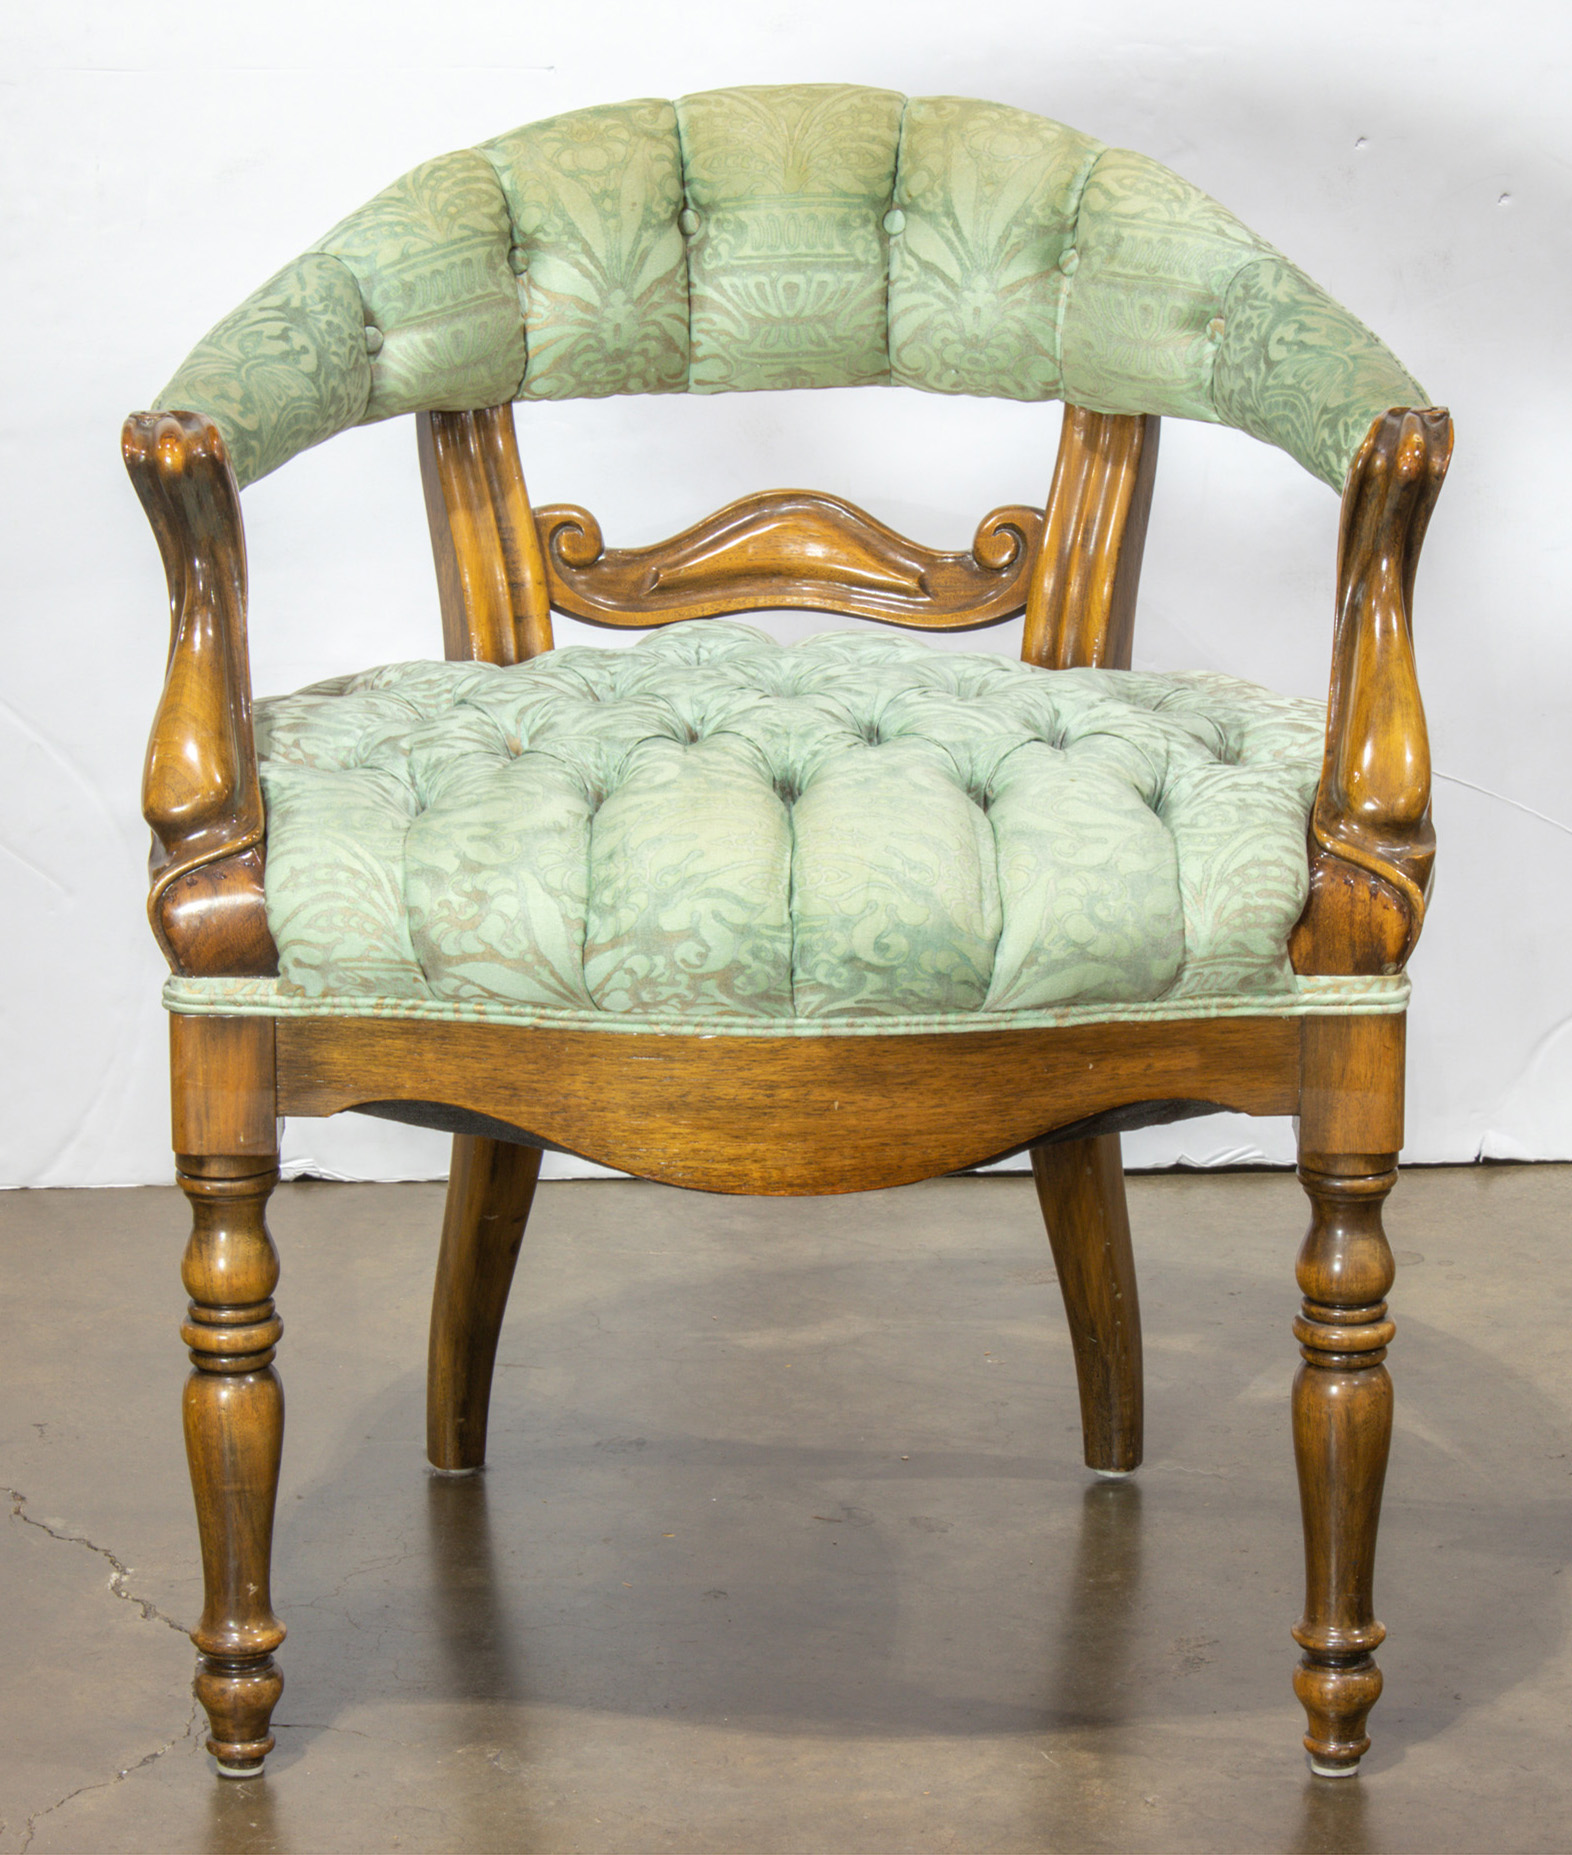 A NEOCLASSICAL STYLE TUFTED ARMCHAIR 3a370c